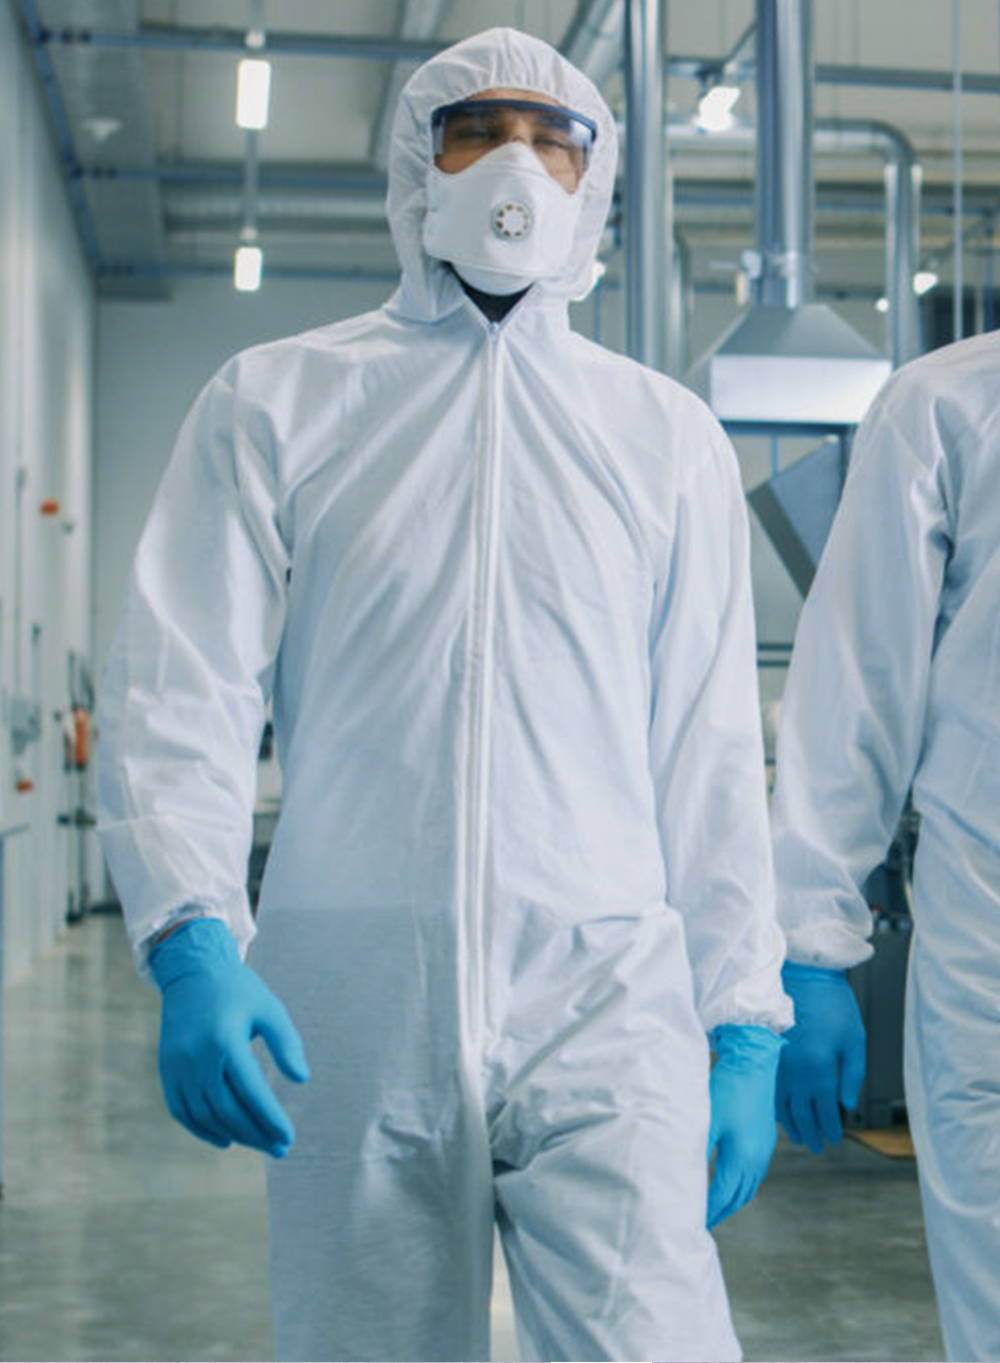 Lab technician wearing disposable coveralls, an N95 mask, disposable nitrile gloves and safety glasses.